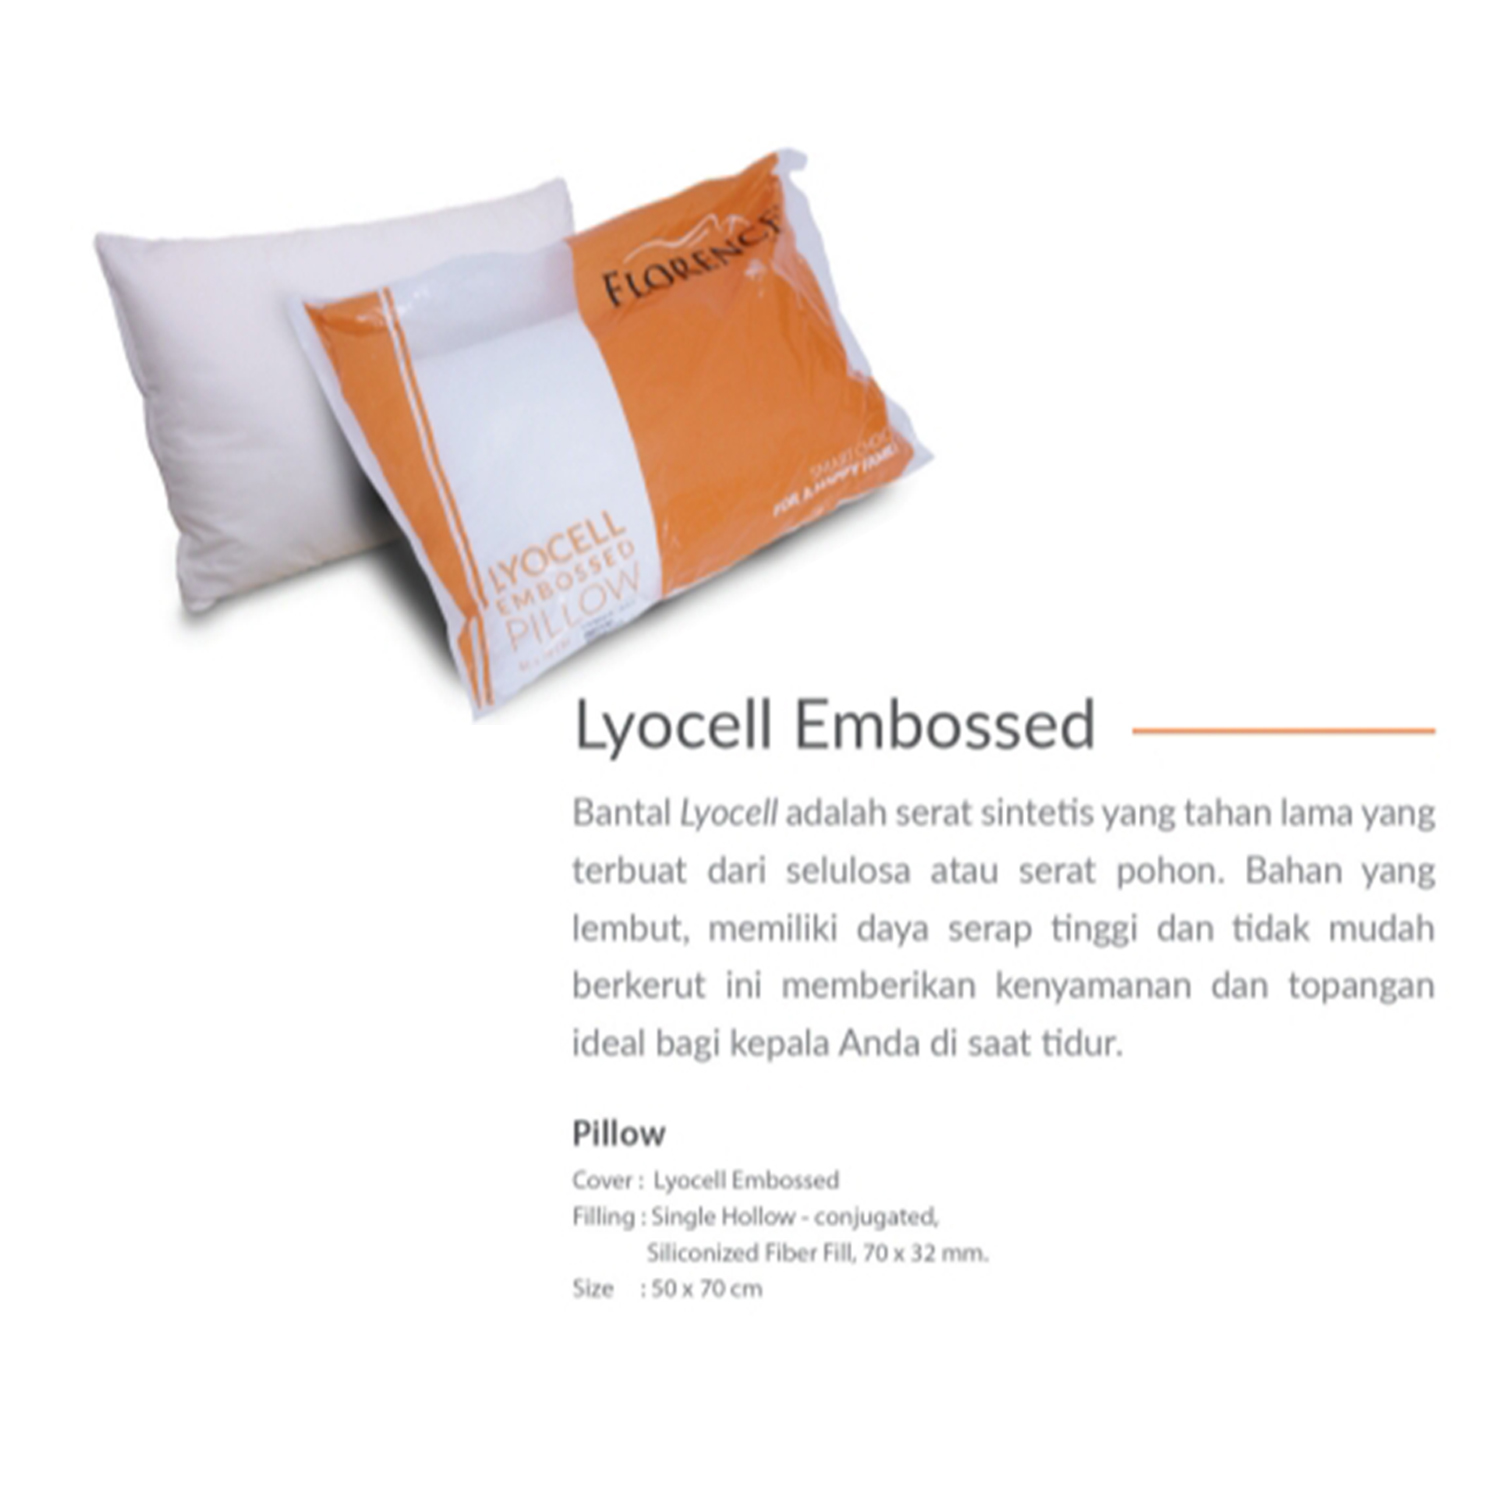 Florence Peach Lyocell Embossed Pillow 46X70 - Bantal Tidur